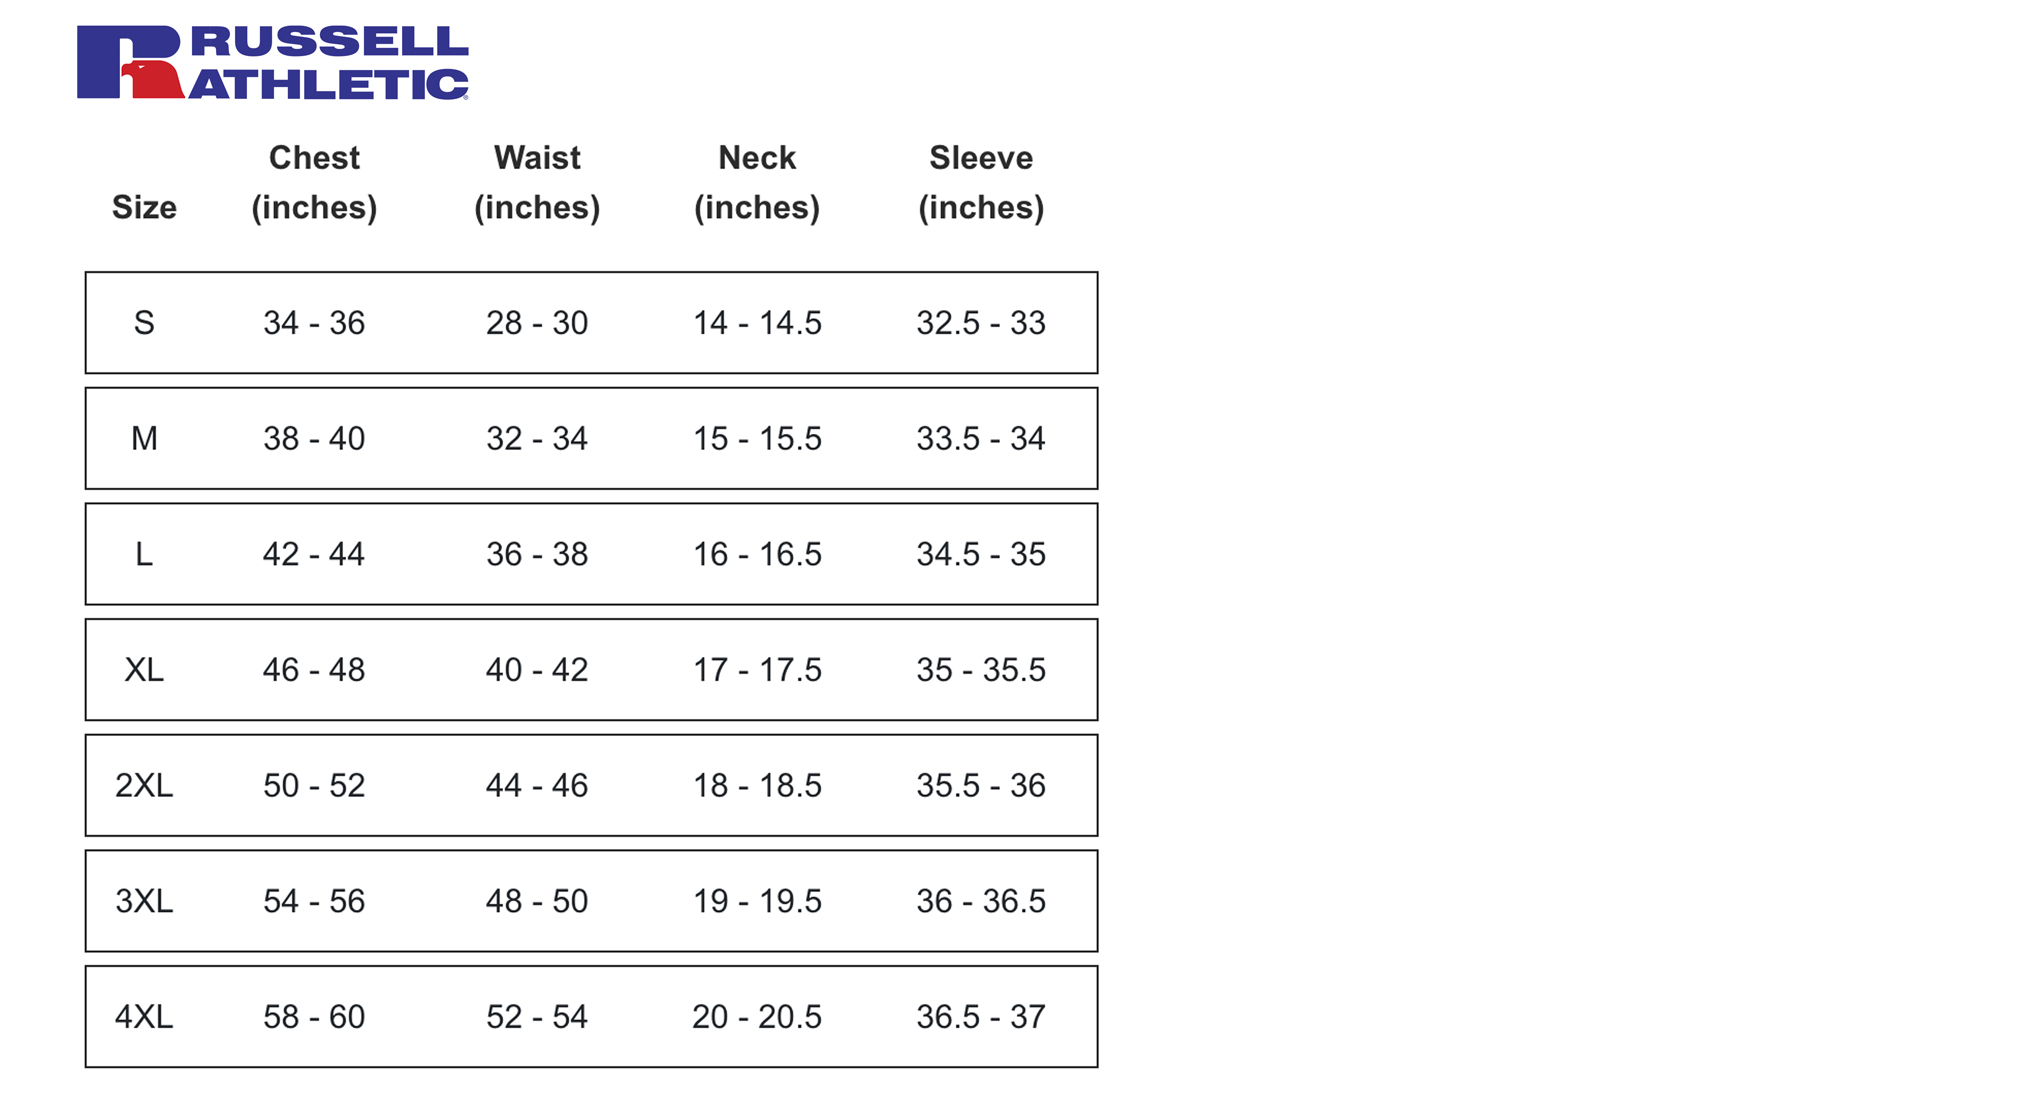 Custom Russell Athletic Sizing Chart